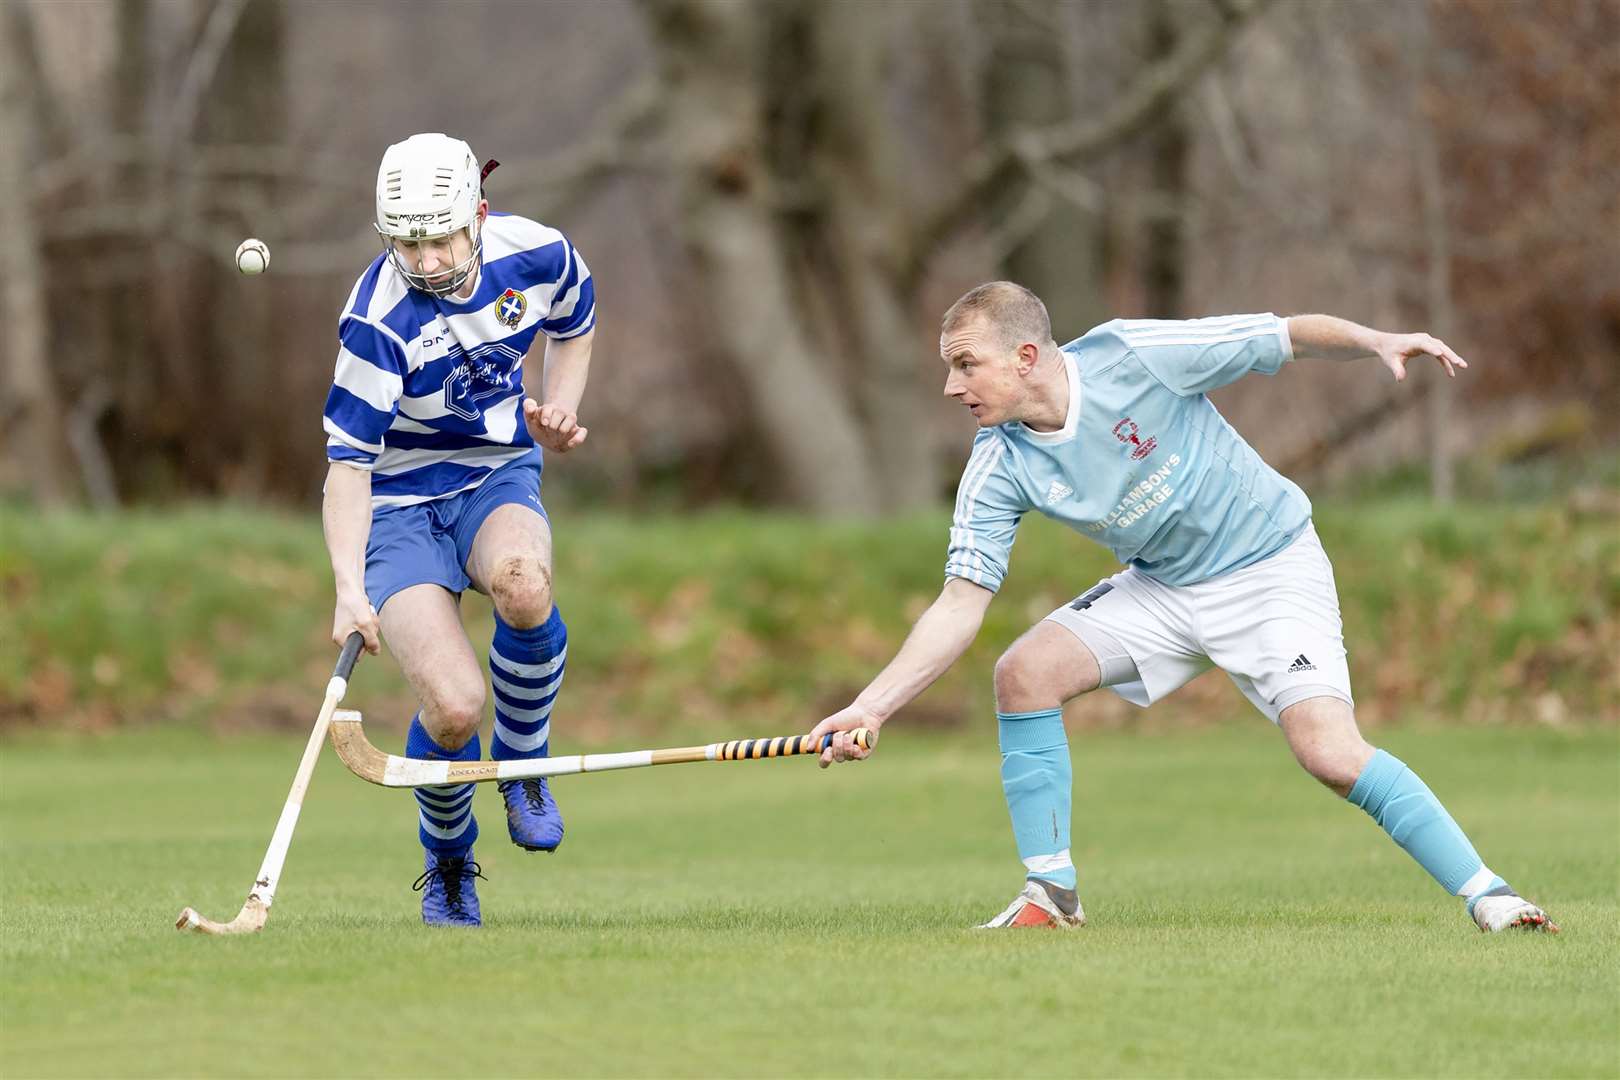 Kevin Bartlett (right) scored one of two hat tricks as Caberfeidh thrashed Lochaber 8-1.